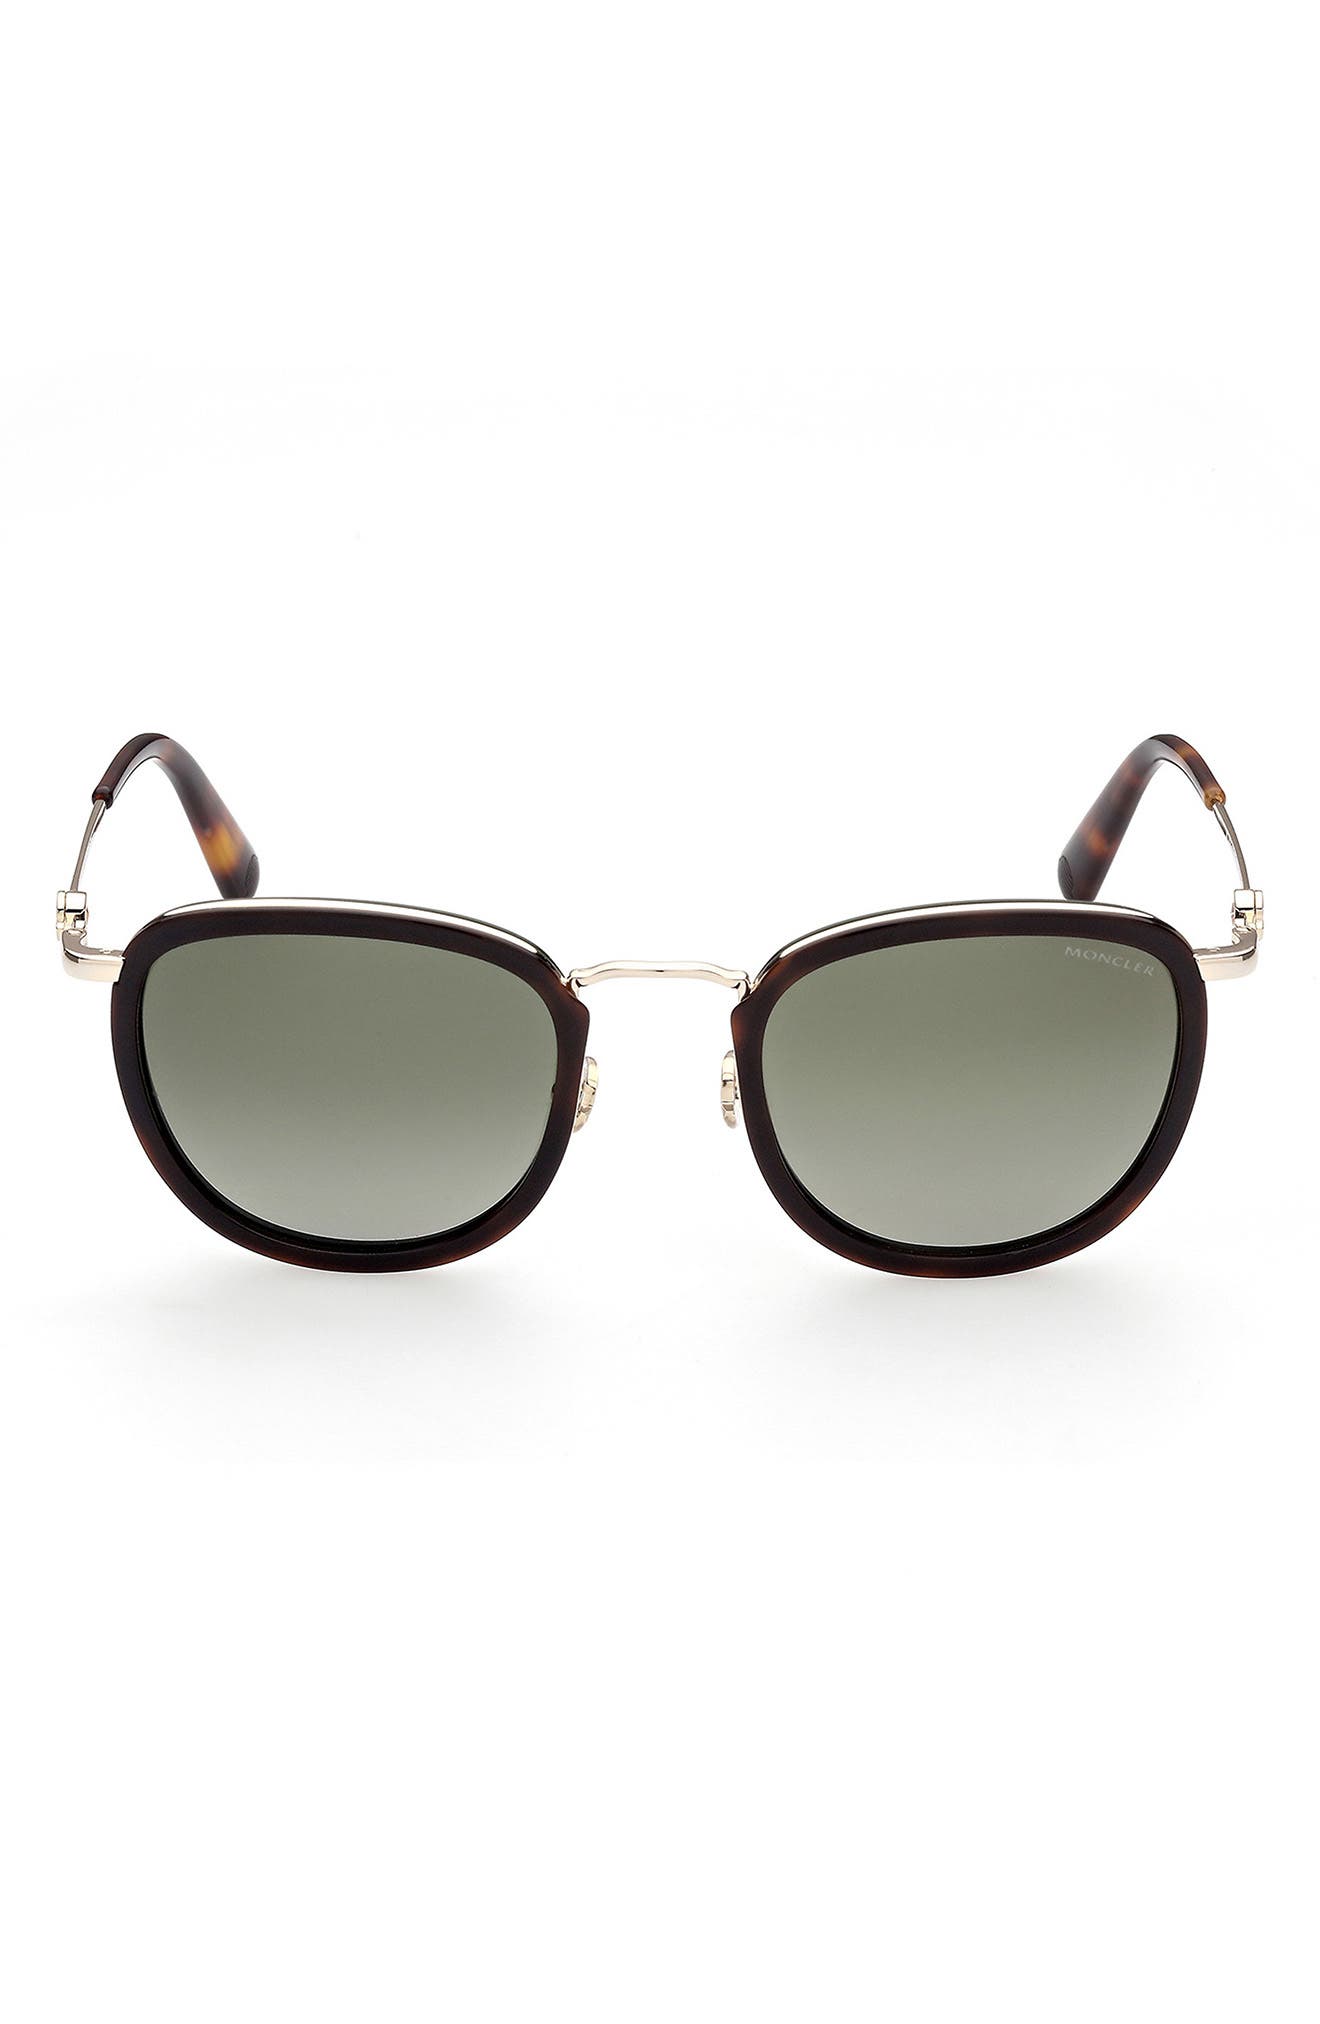 Moncler 52mm Polarized Round Sunglasses in Havana /Green at Nordstrom